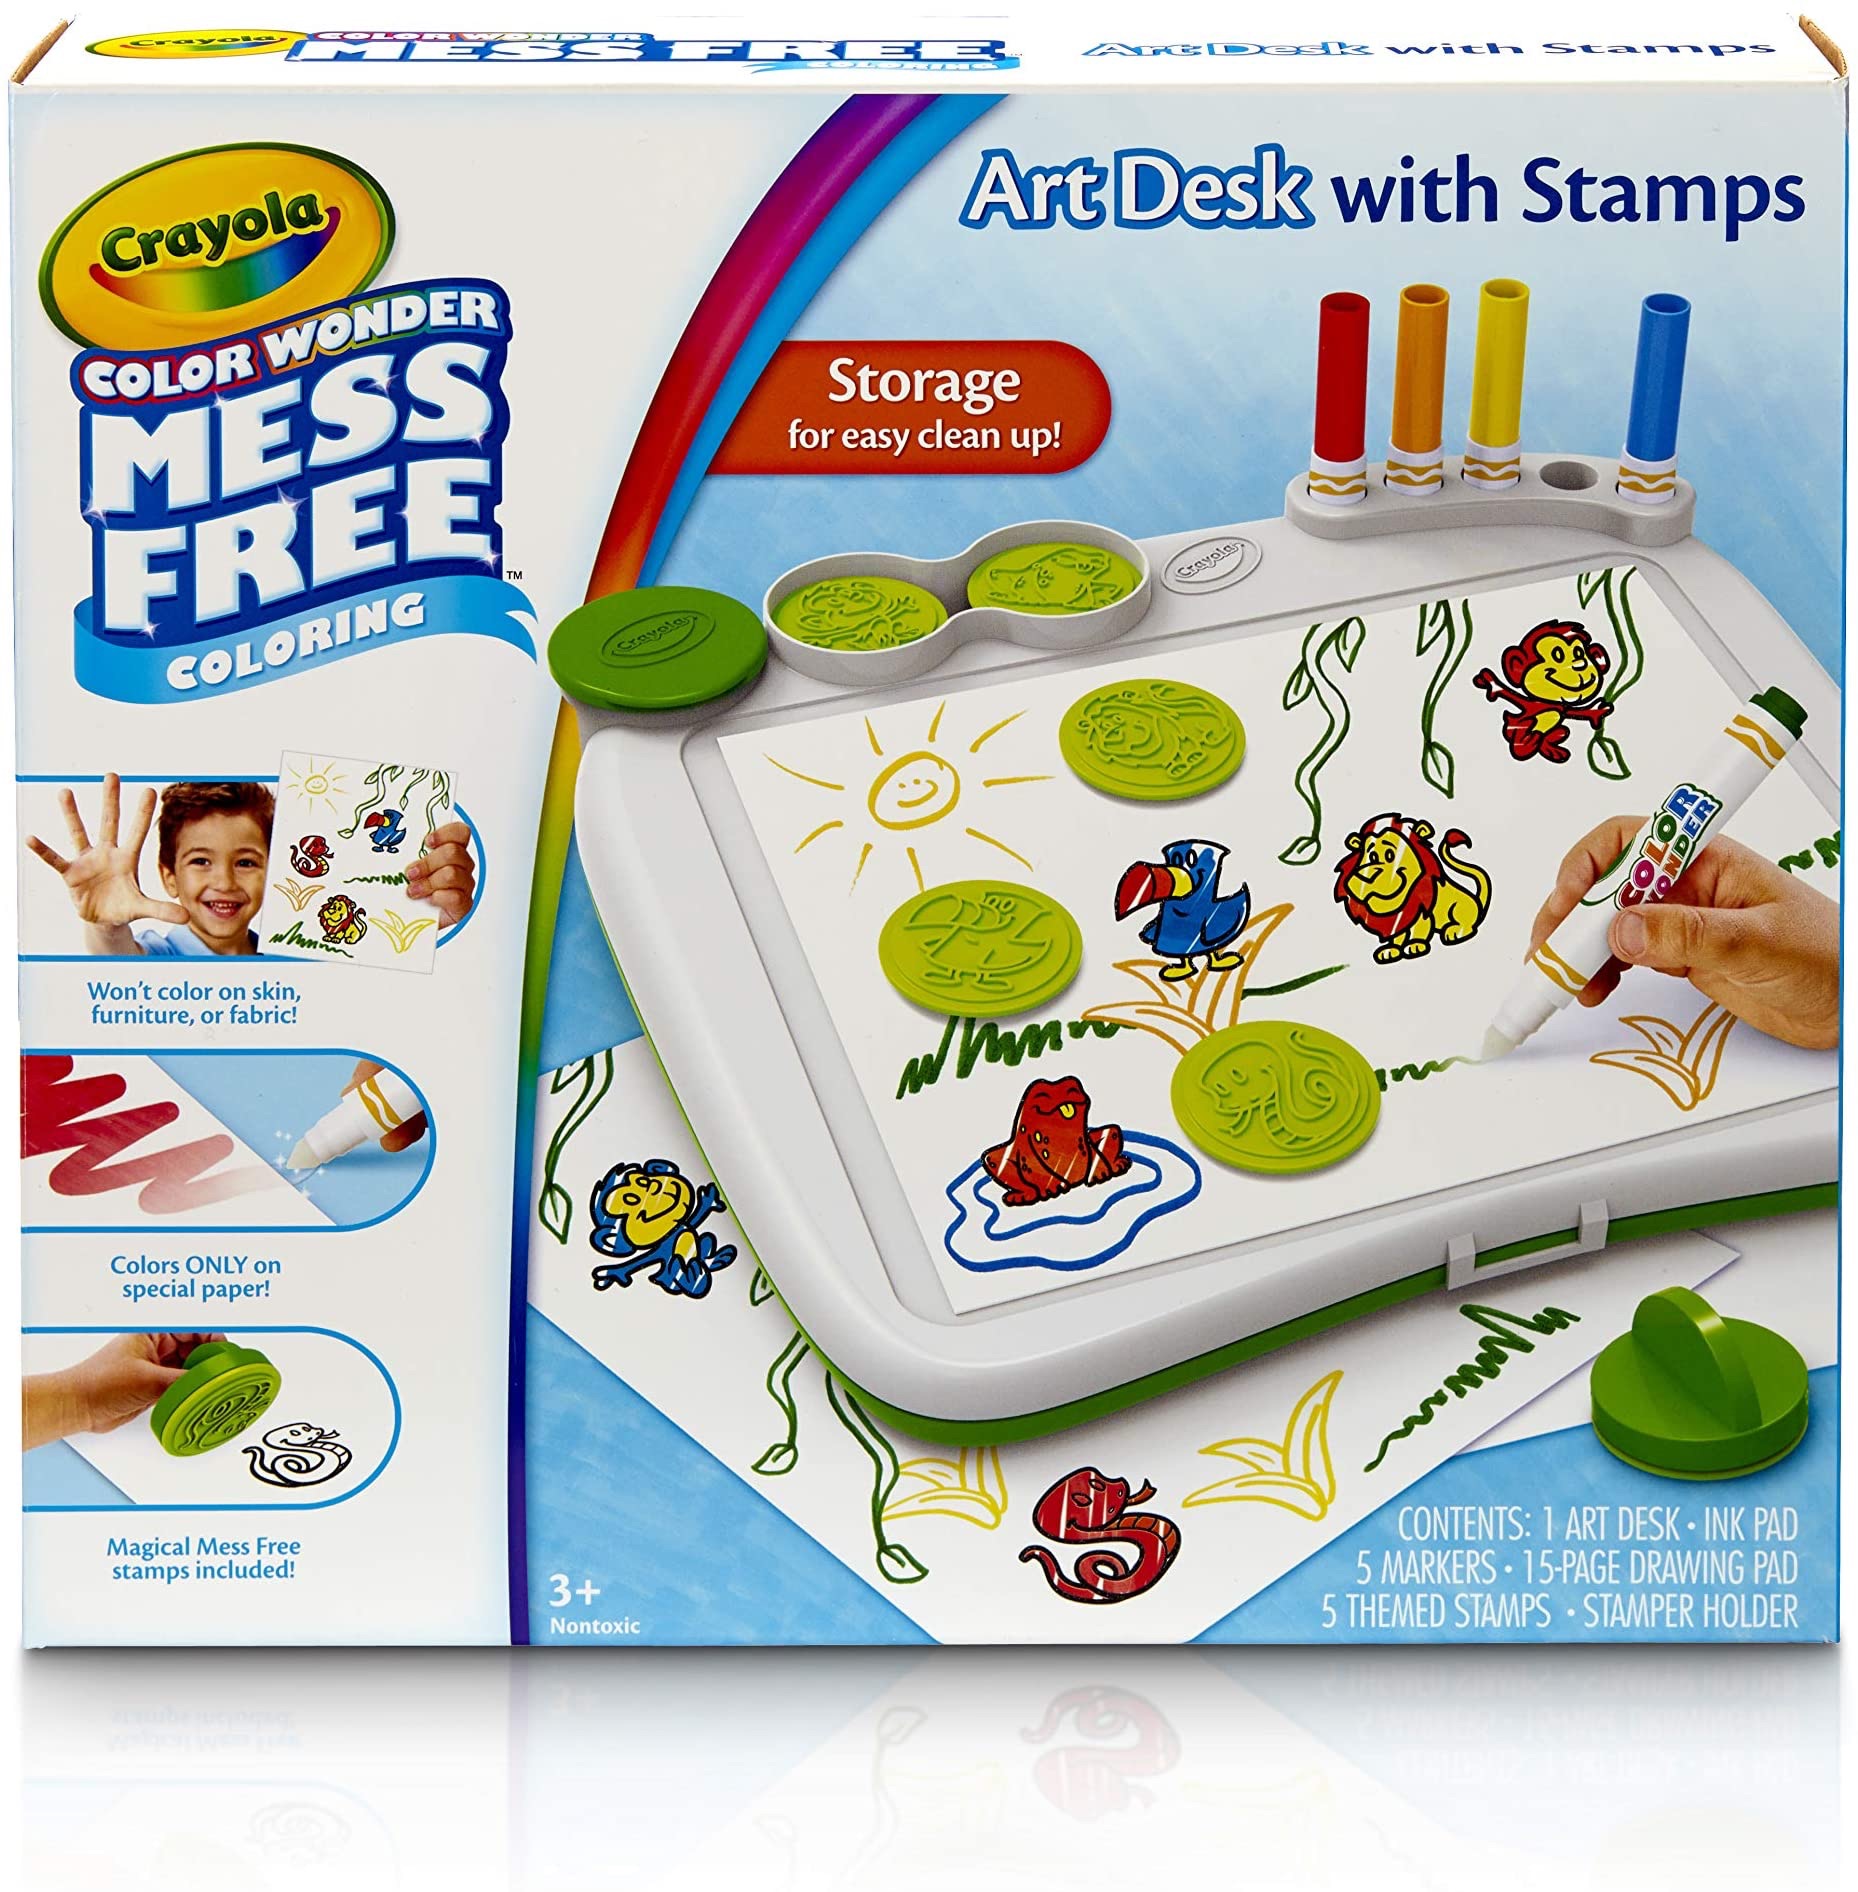 Amazon.com: Crayola Color Wonder Mess Free Art Desk with Stamps, 20+ Pieces, Kids Toys: Toys & Games儿童绘画套装